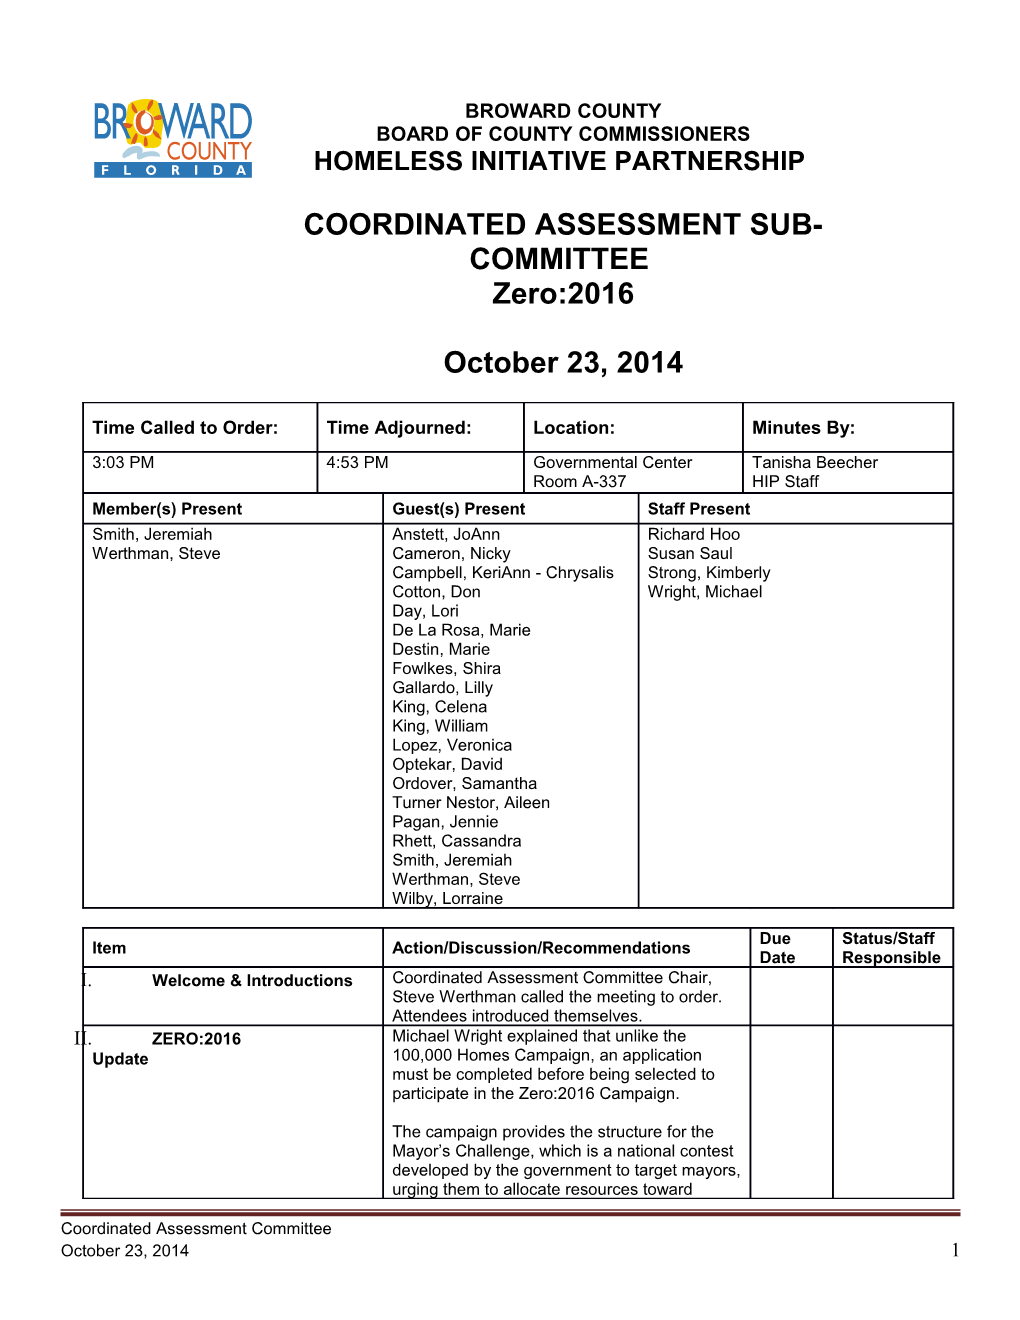 October 23, 2014 CAC ZERO:2016 Final Approved Notes